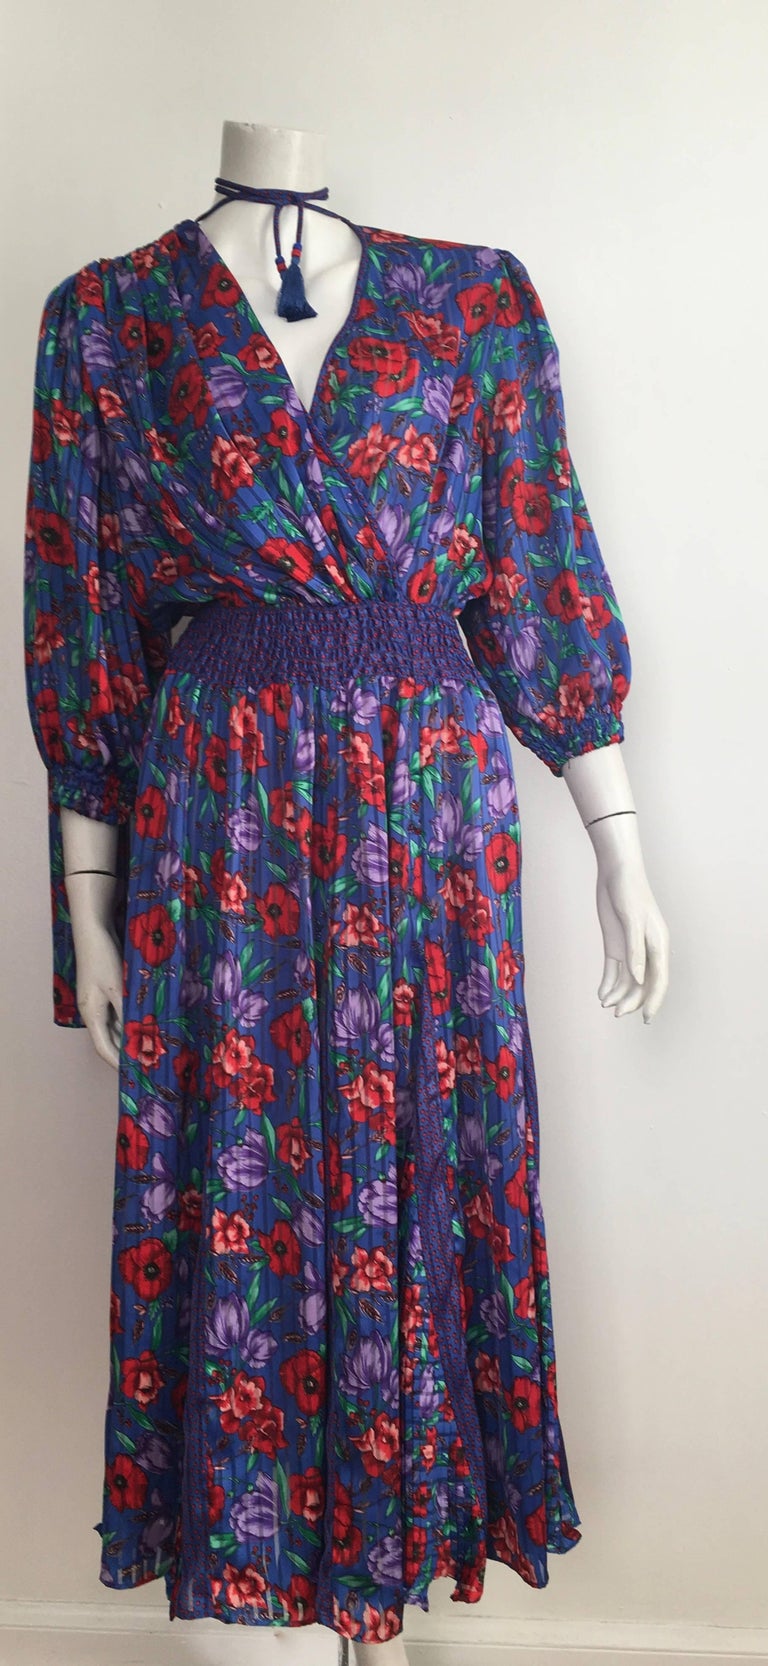 Diane Freis Floral Dress is Size Small. For Sale at 1stdibs